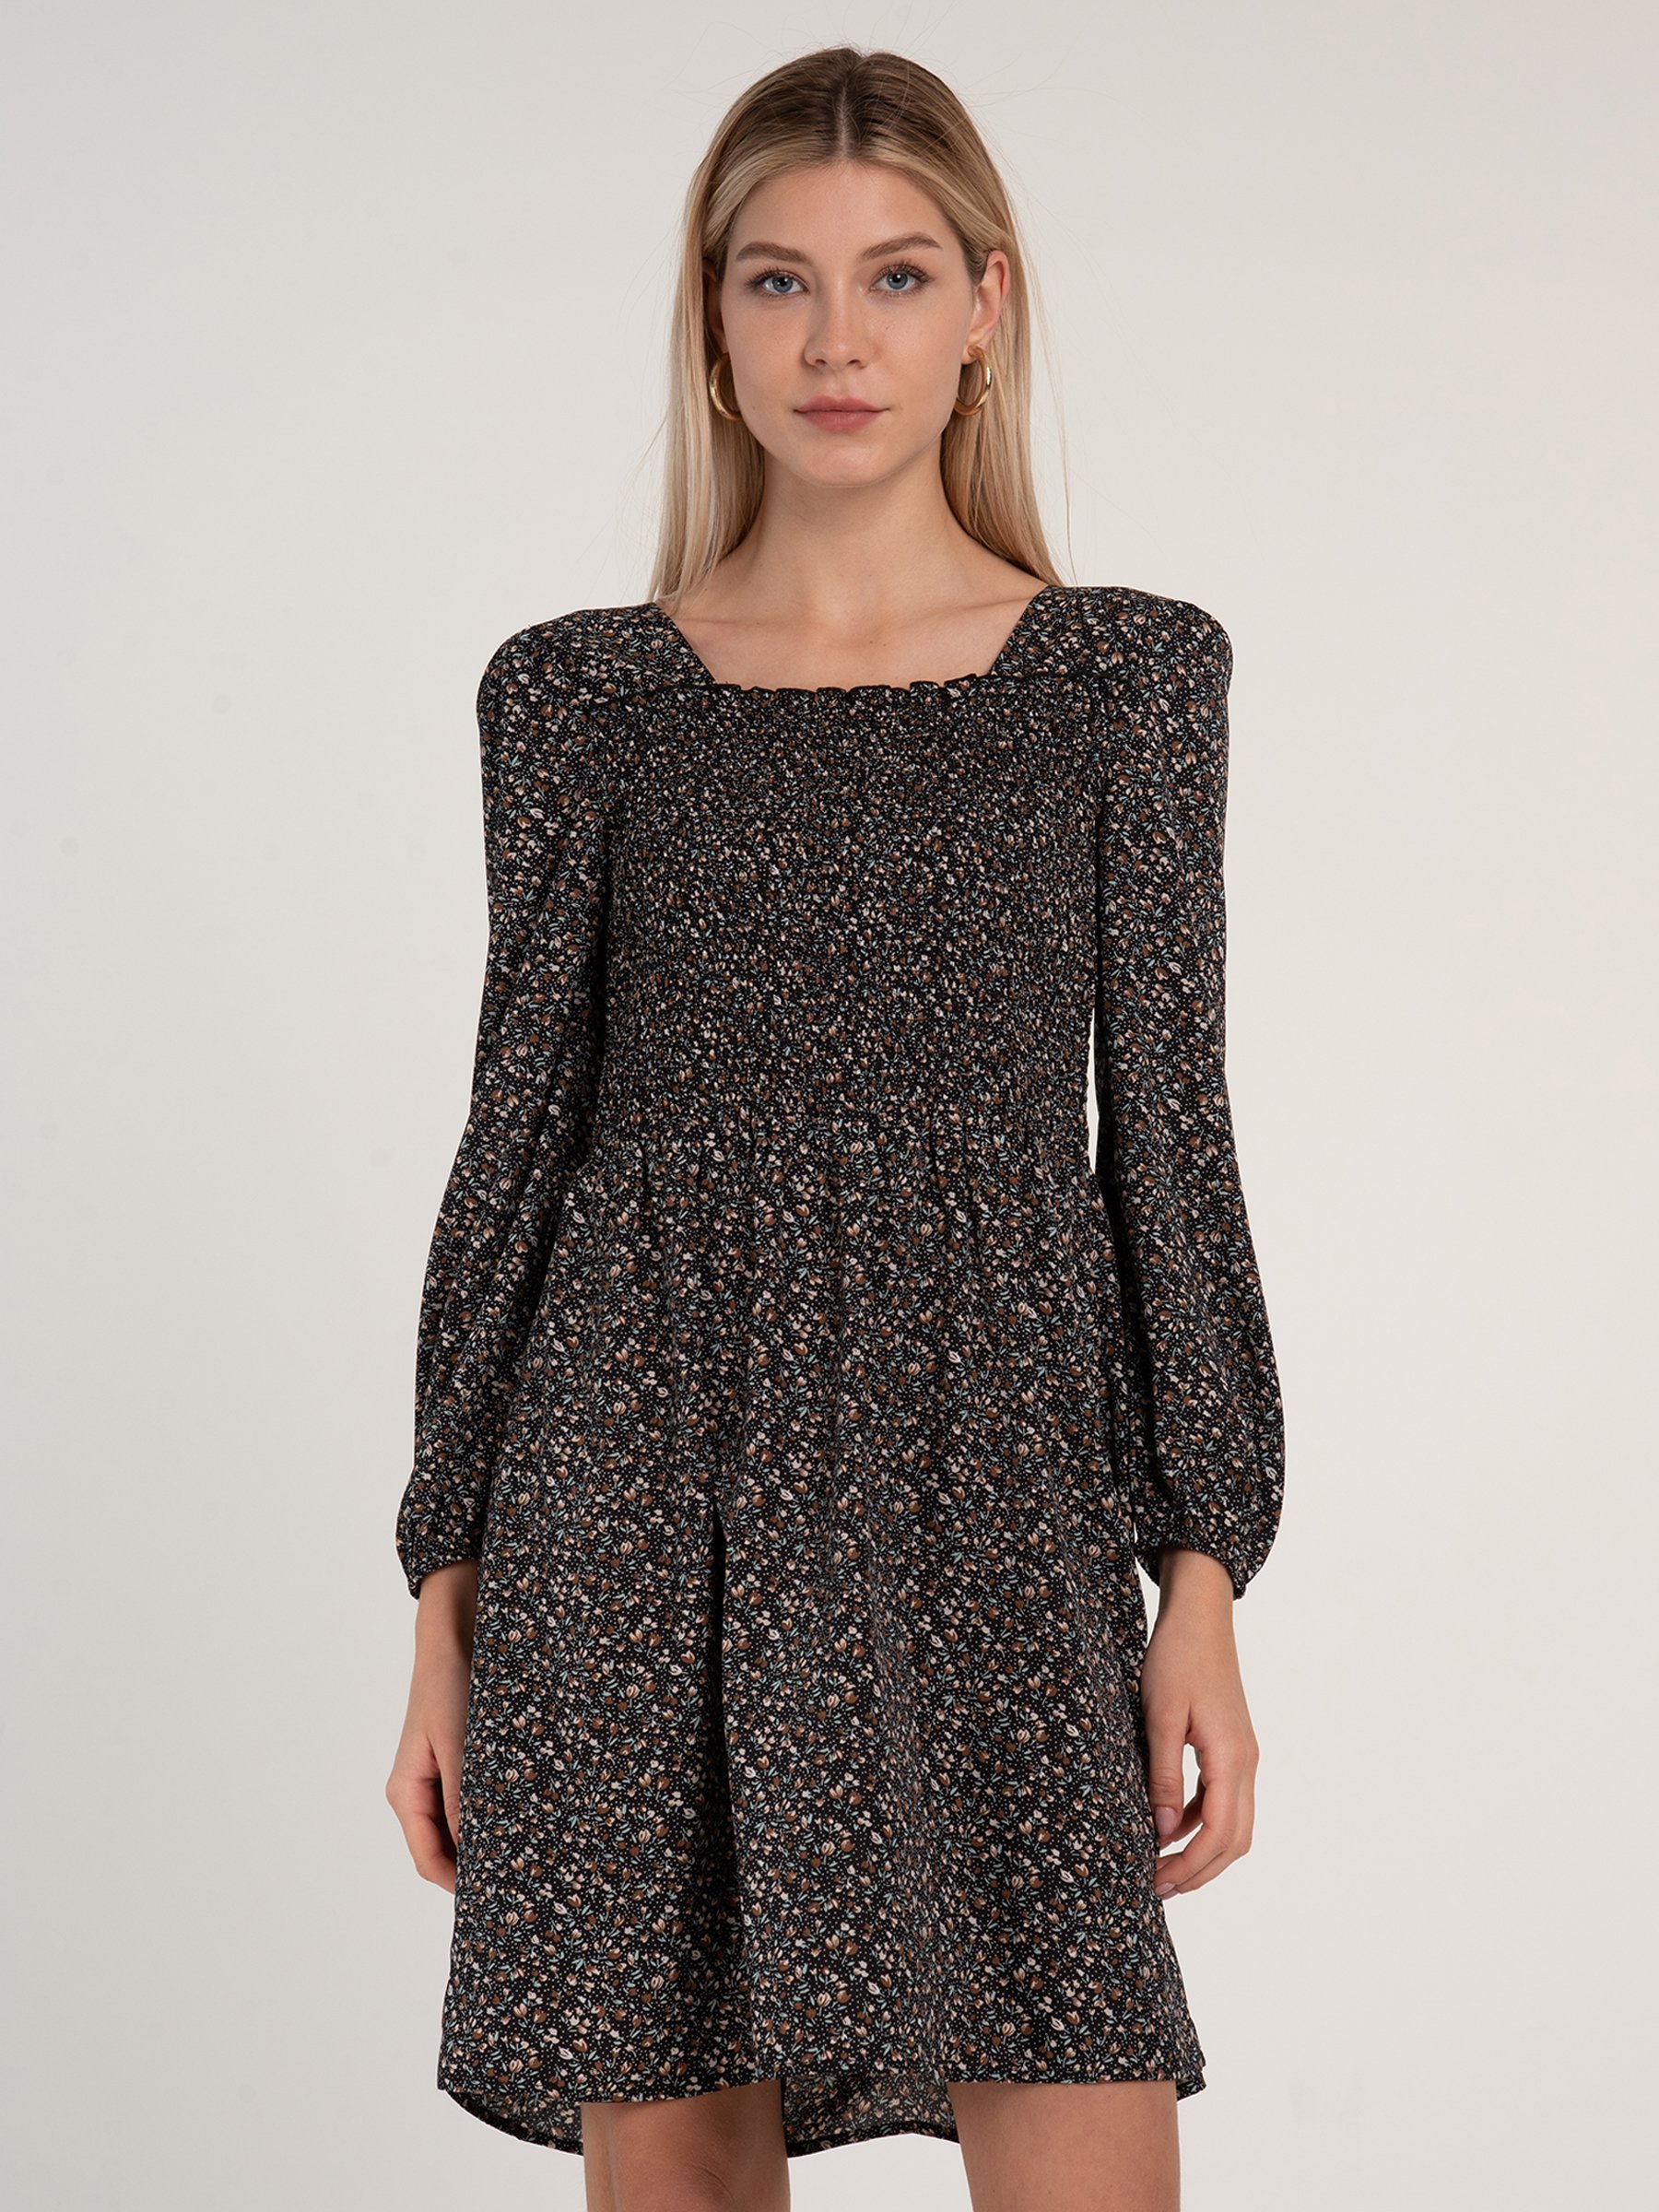 Long sleeve gathered top floral dress ...